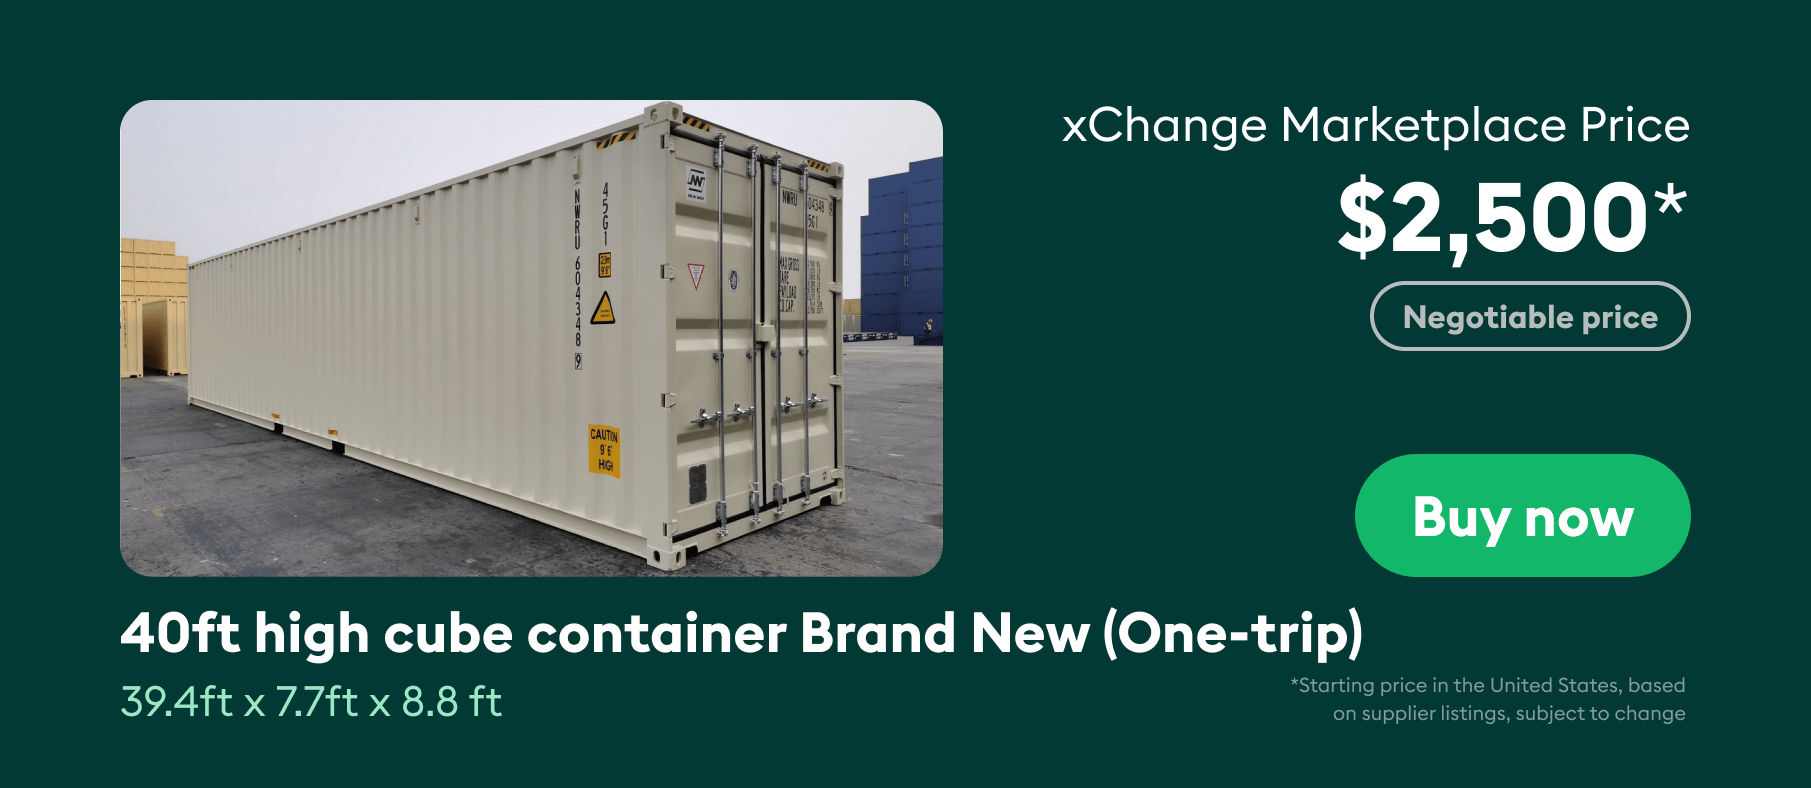 40ft high cube brand new container costs around $2,500 on the xChange Marketplace.